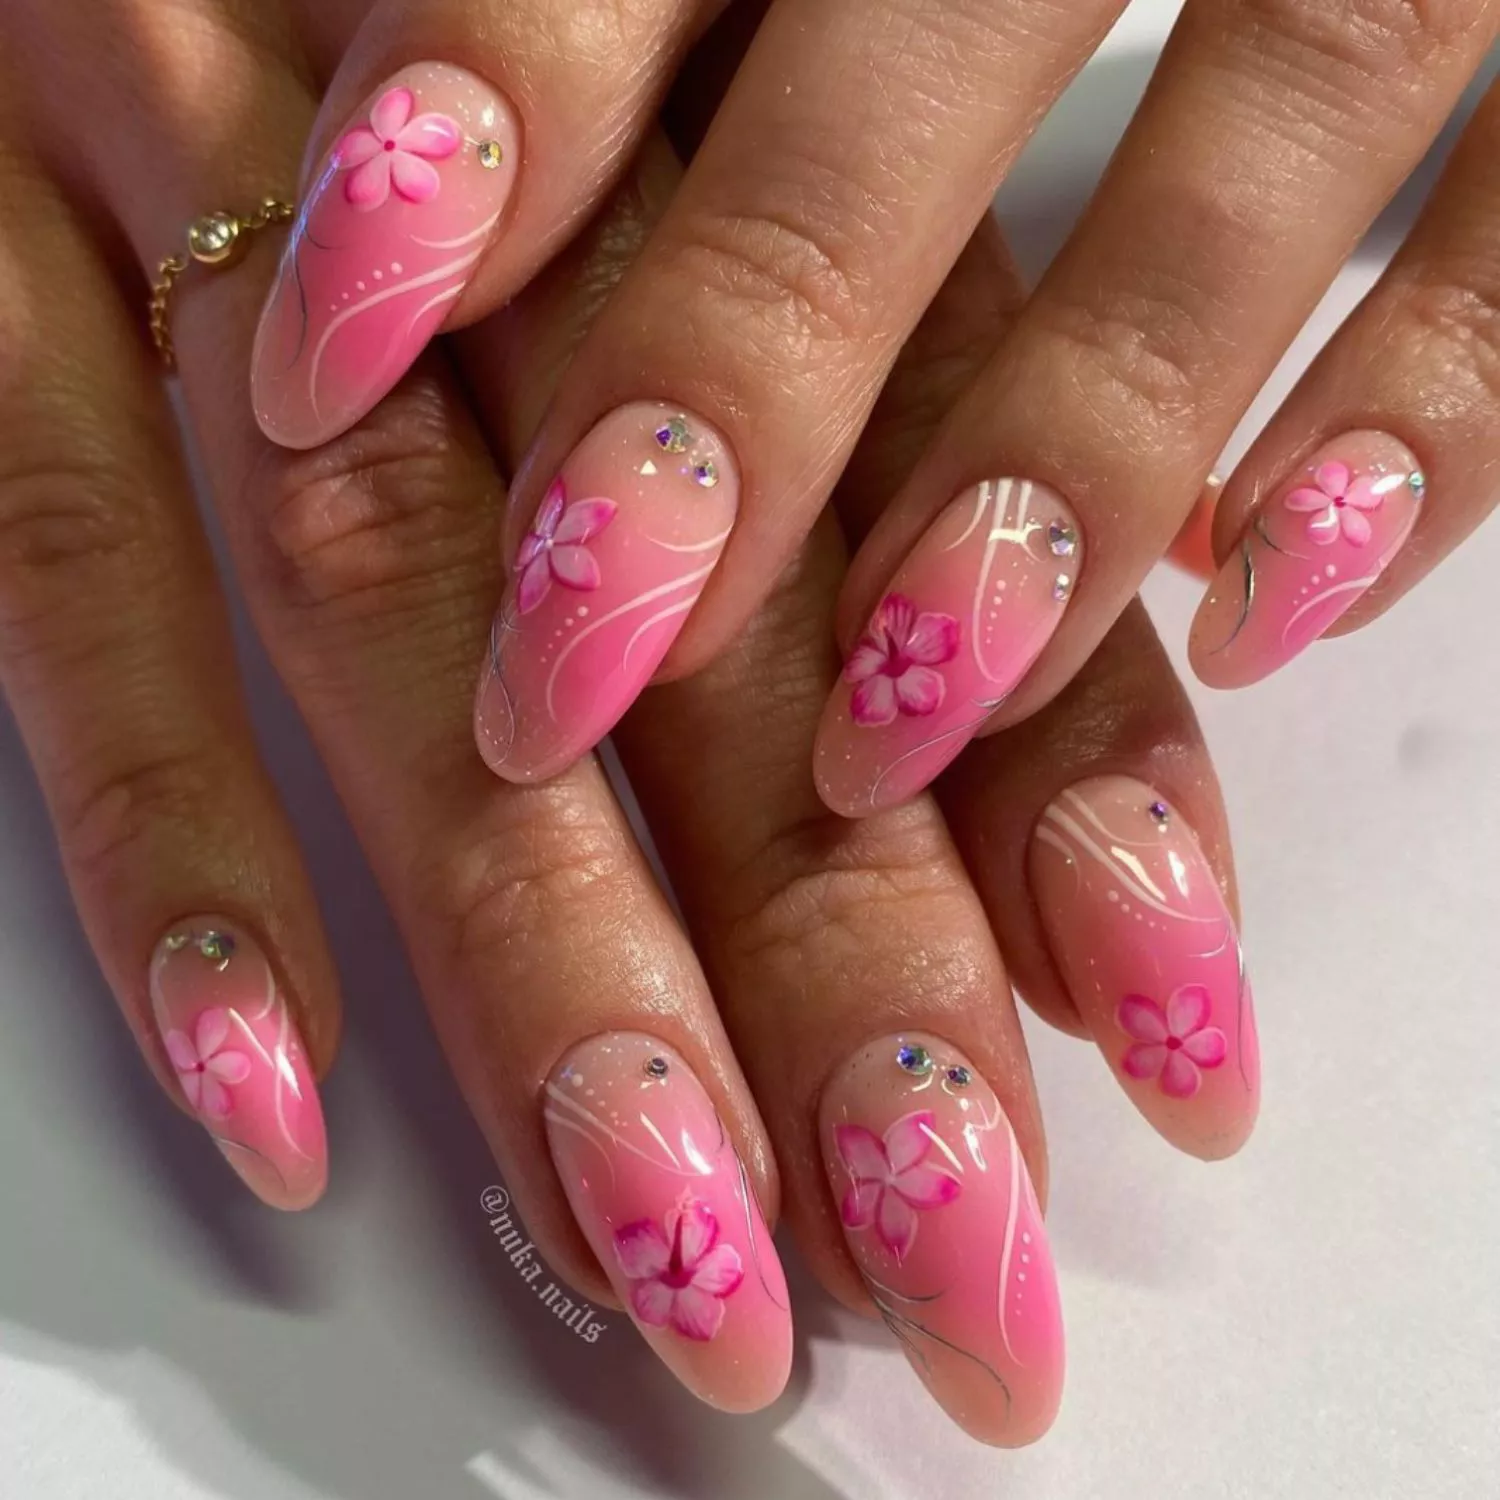 Pink ombre manicure with hibiscus designs, rhinestones, and white curving lines